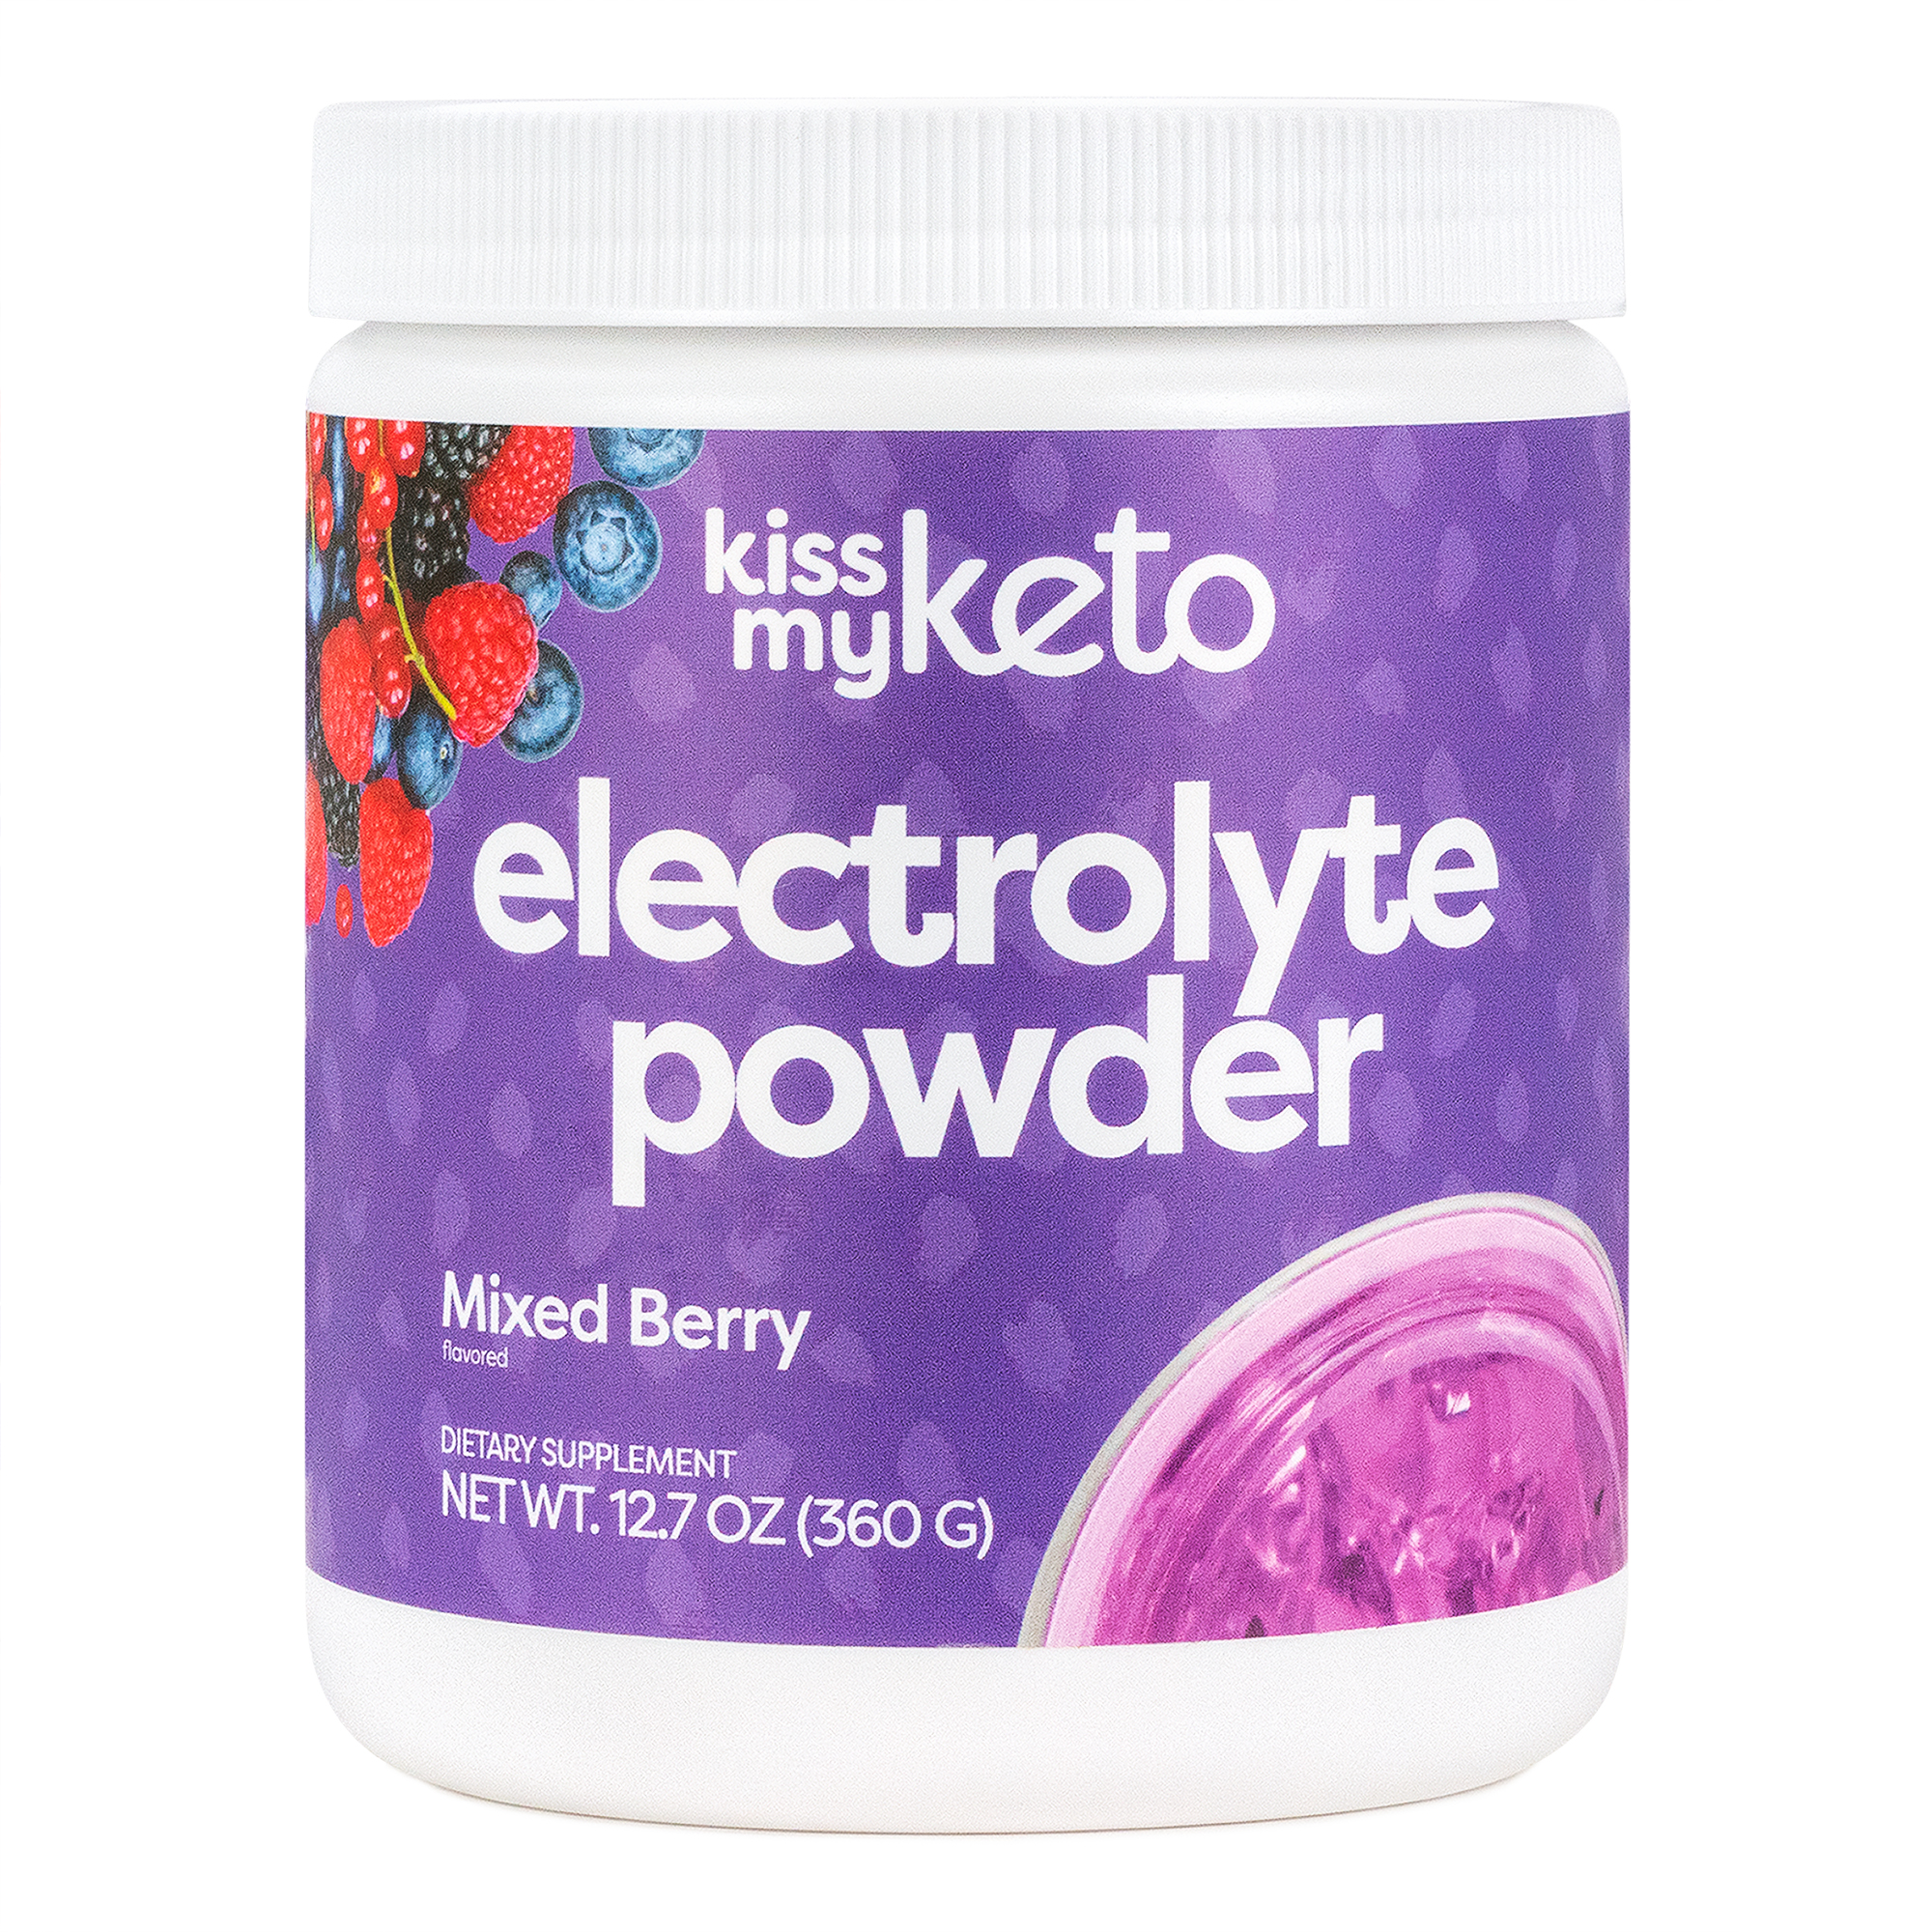 Kiss My Keto Electrolyte Powder - Mixed Berry 12.7 oz Pwdr - image 1 of 7